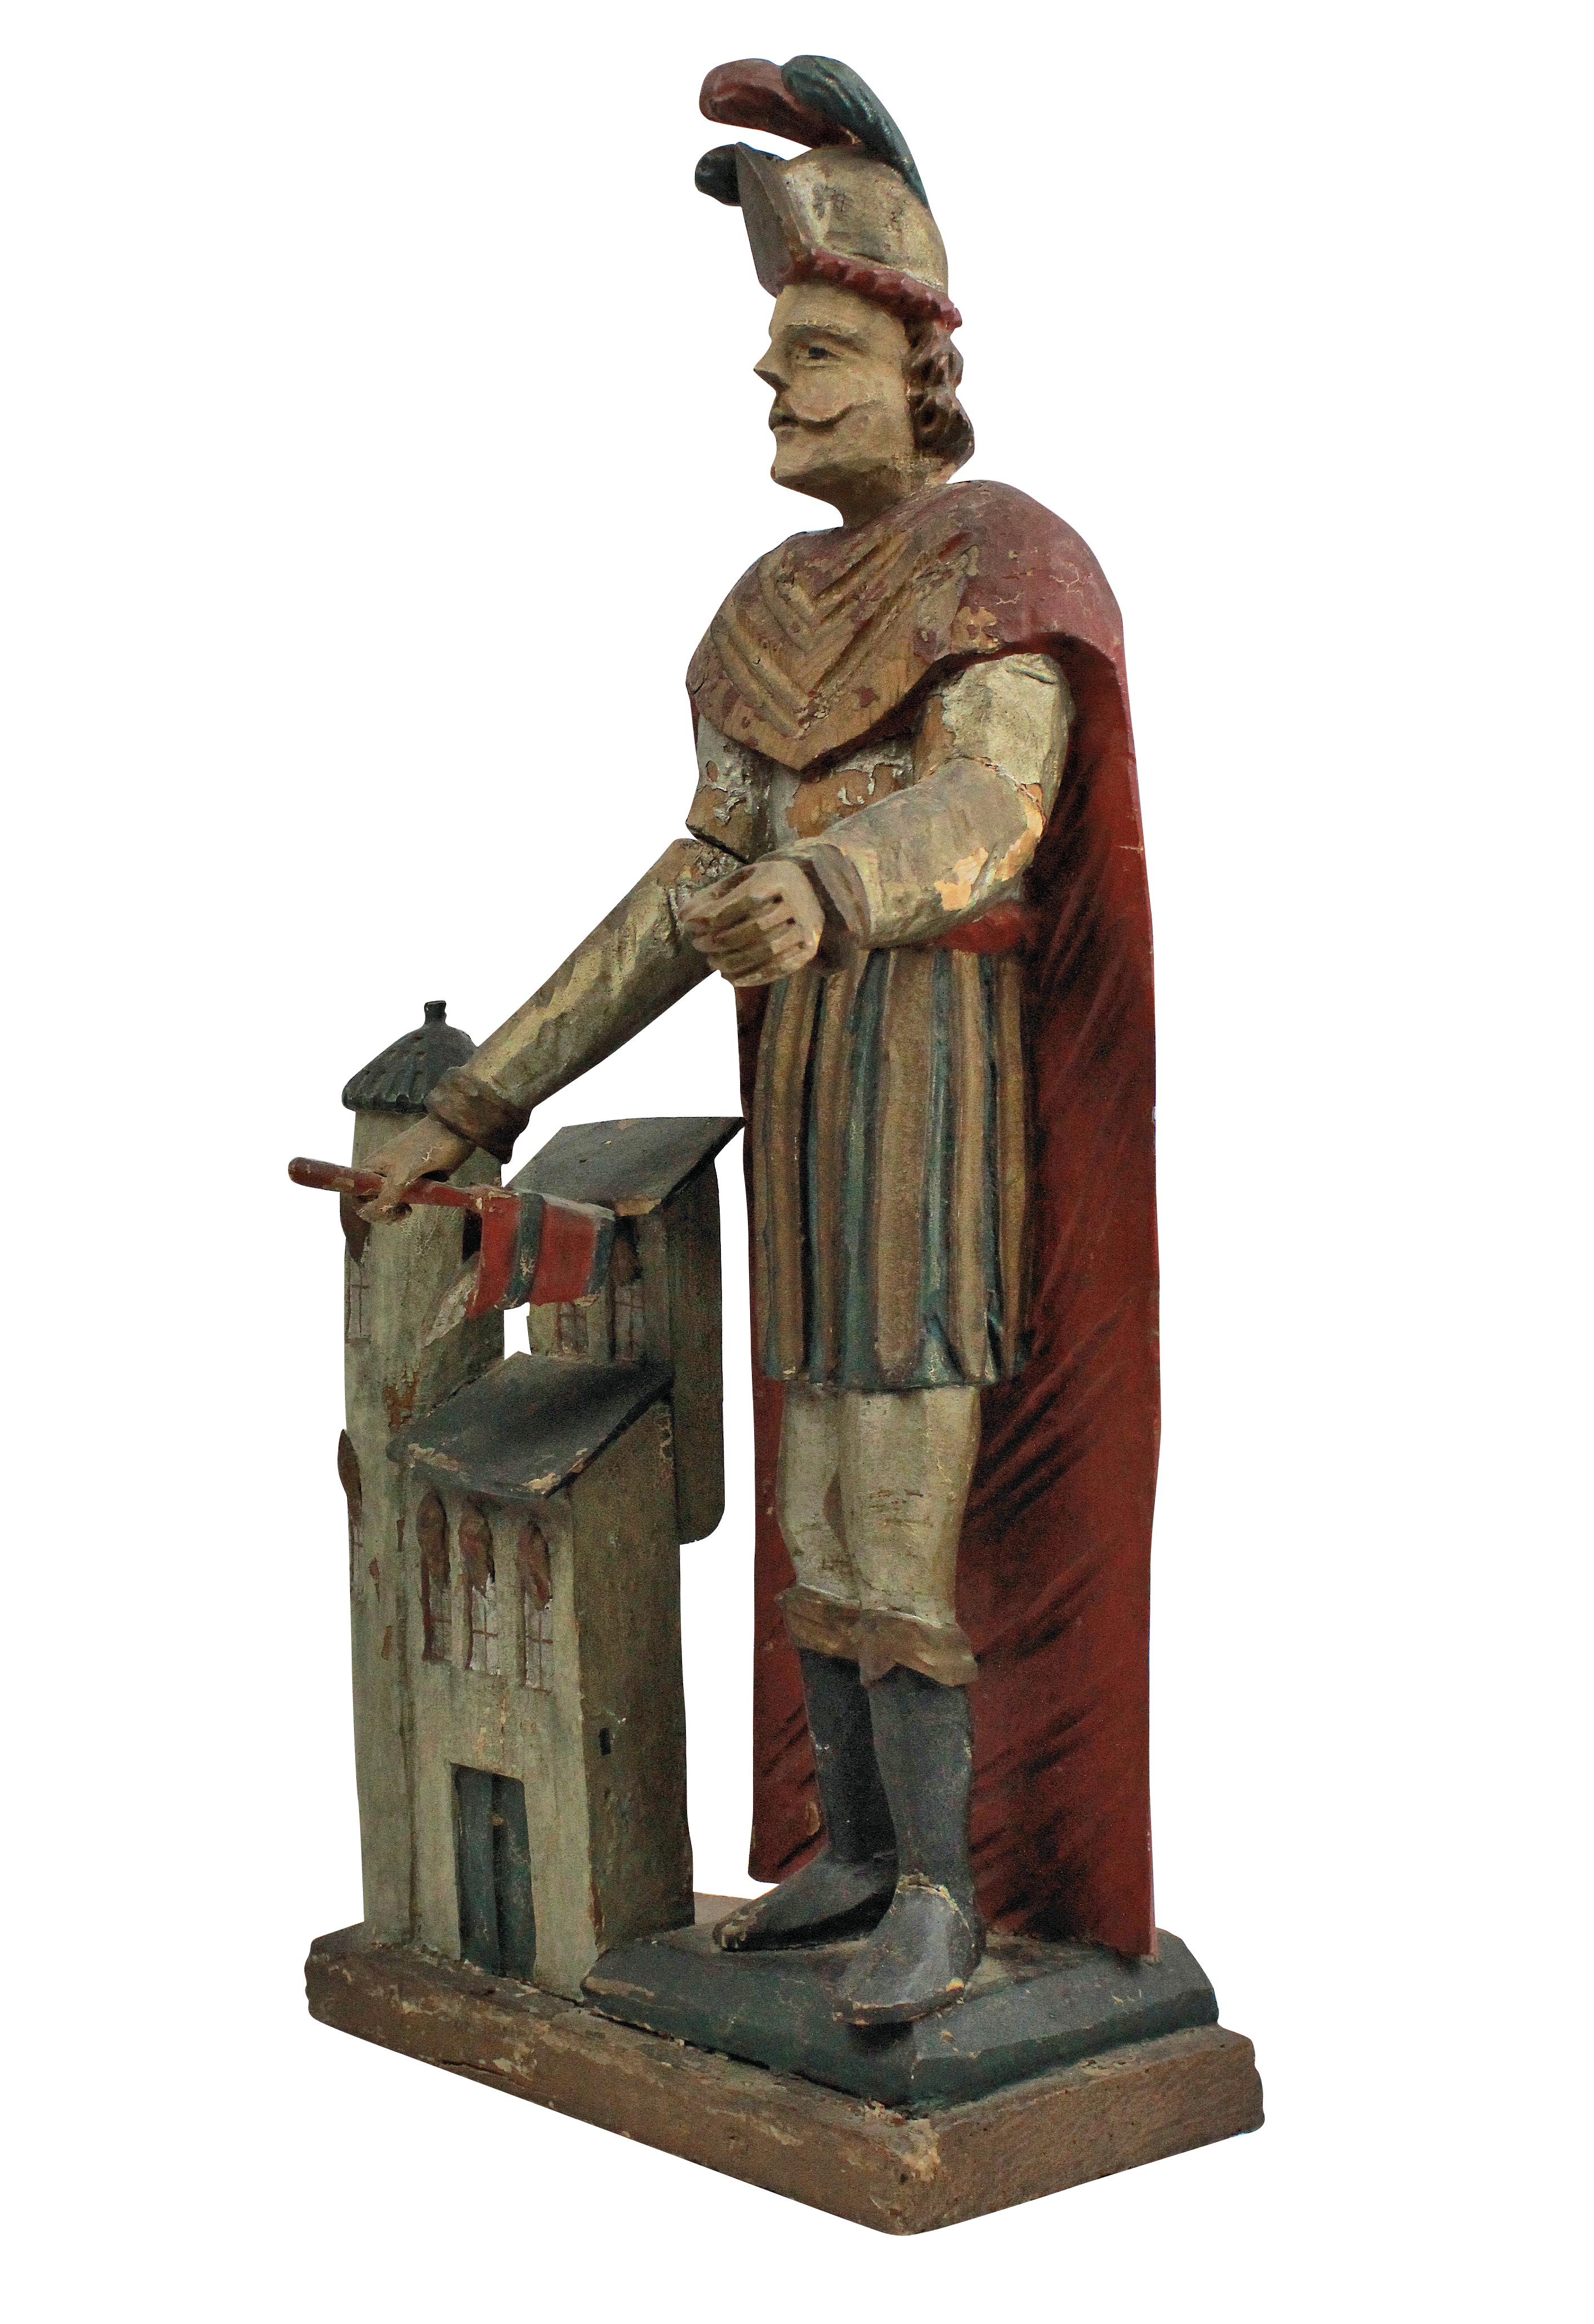 A French late 18th century statue of St Florian, in carved fruitwood with polychrome paints. Missing his spear.

The Patron Saint of Austria, chimney sweeps, fire fighters & brewers.